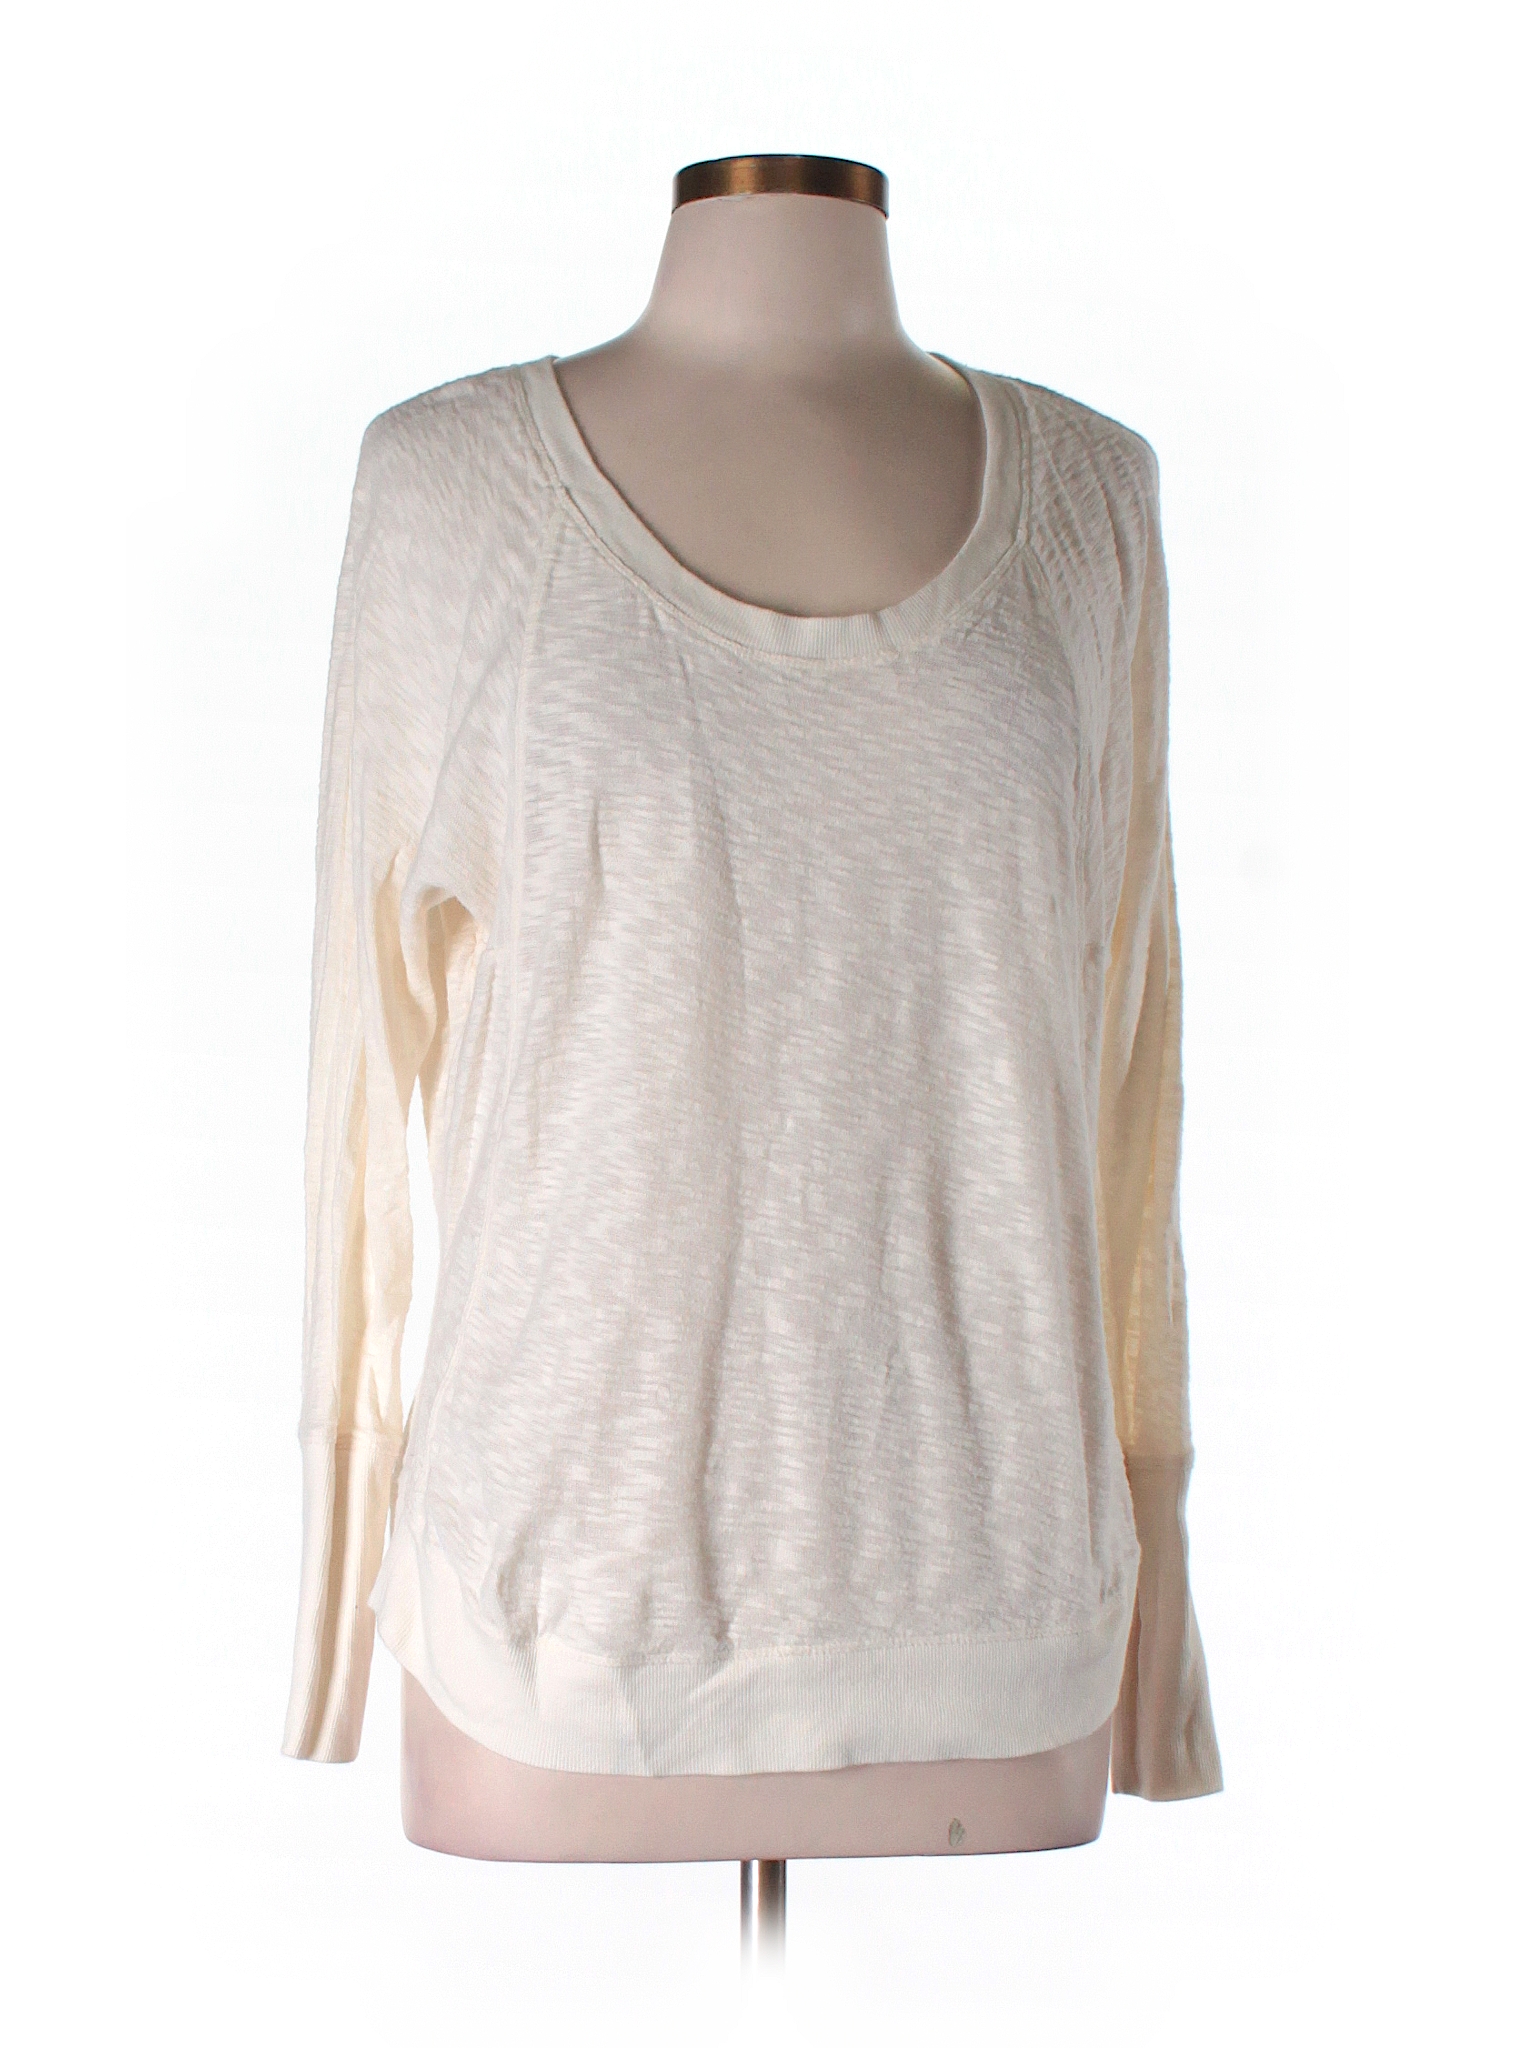 Cynthia Rowley TJX 100% Cotton Solid Beige Long Sleeve T-Shirt Size L ...